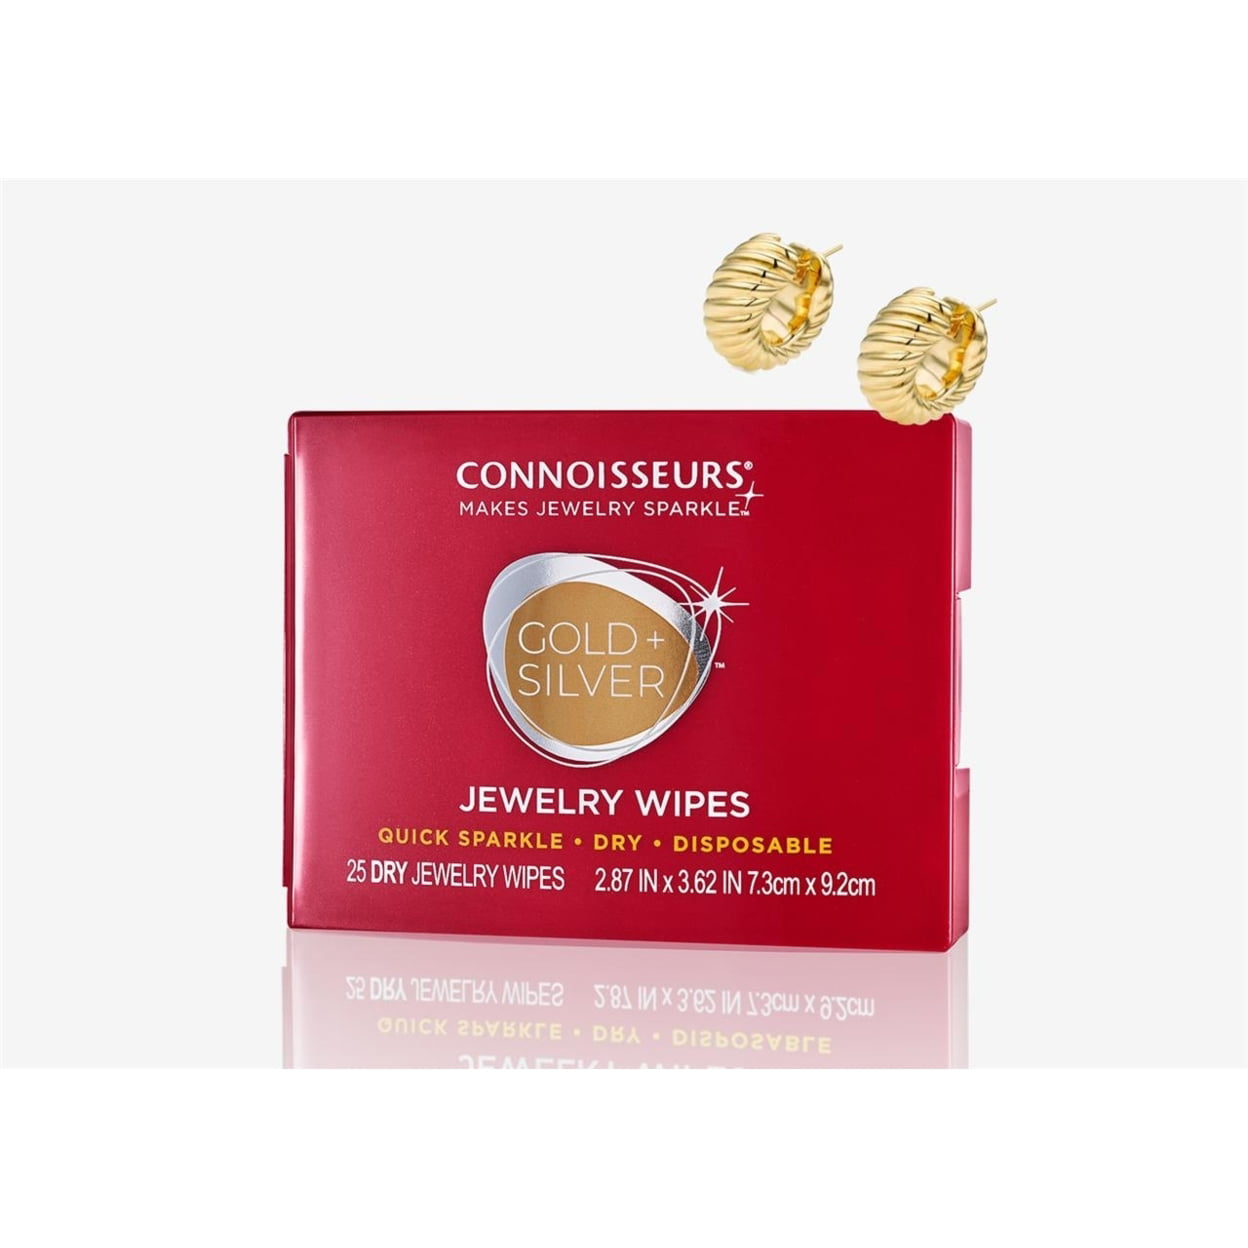 Connoisseurs Gold & Silver Jewelry Cleaning Wipes, Red Compact, 25ct Dry Disposable Wipes Clean and Polish Gold and Silver Jewelry